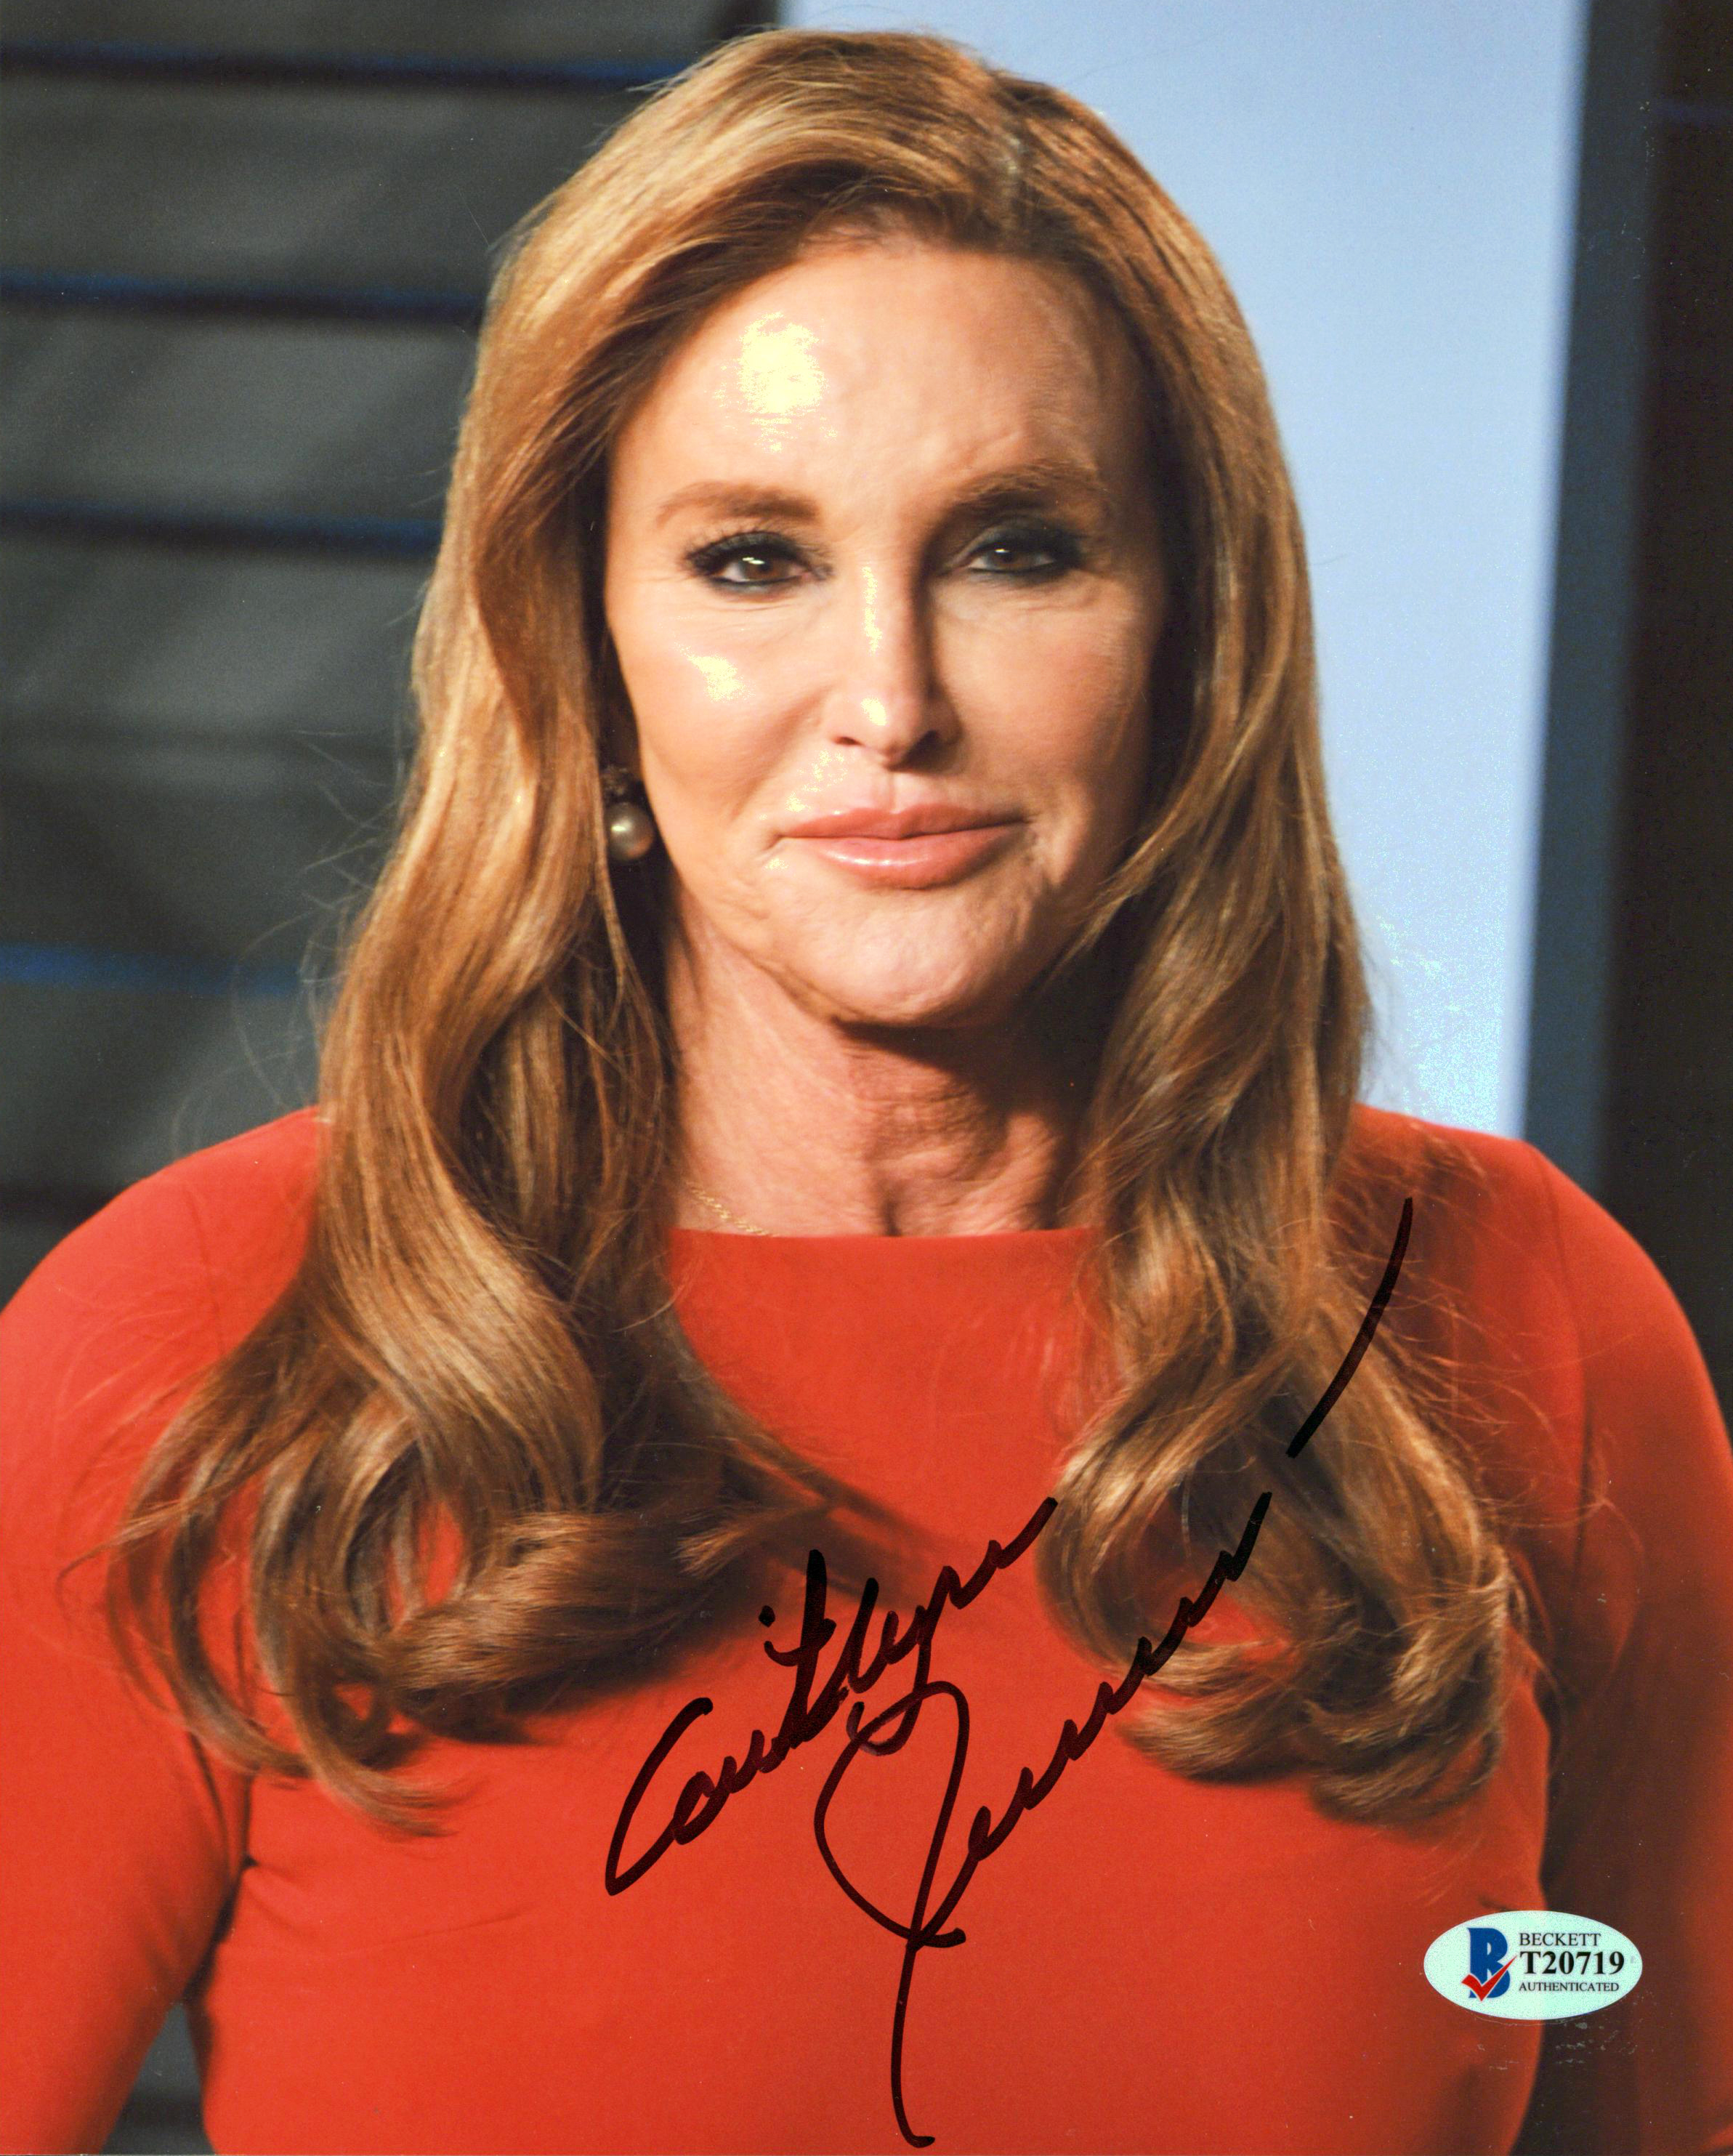 Press Pass Collectibles Caitlyn Jenner I Am Cait Authentic Signed 8x10 Photo Autographed BAS #T20719